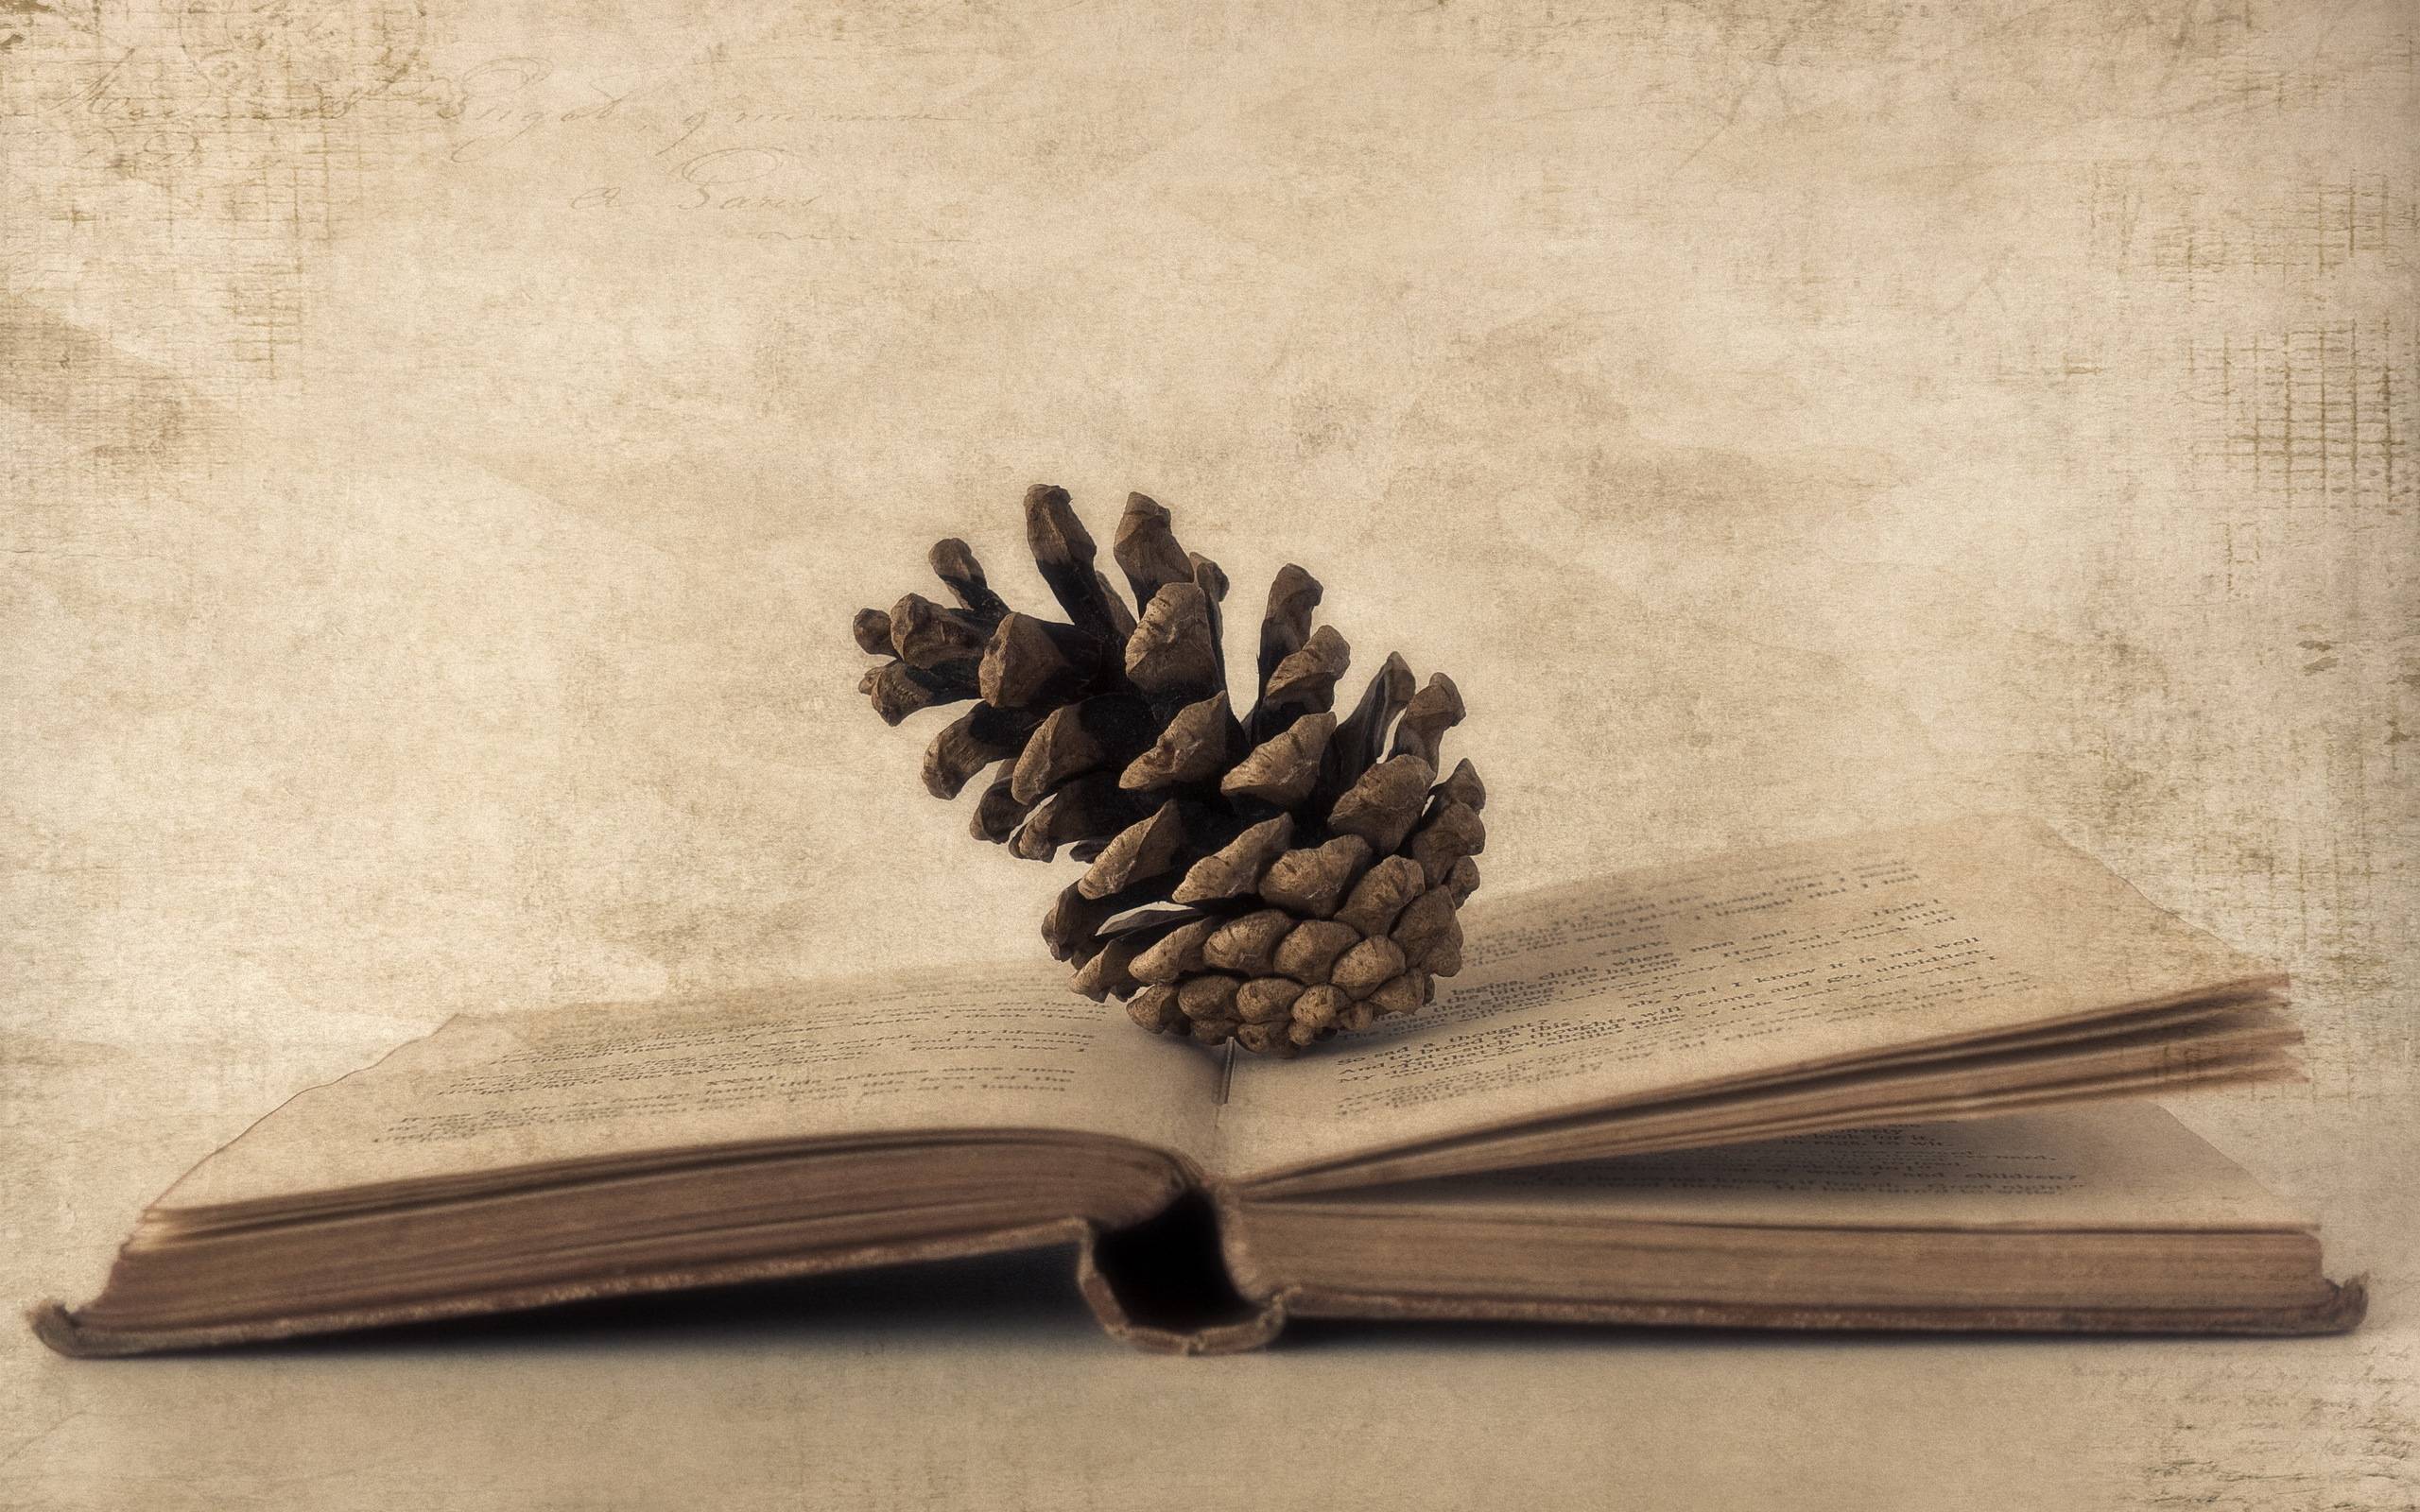 Cool Pinecone On The Book Wide Wallpaper 2560x1600PX Book